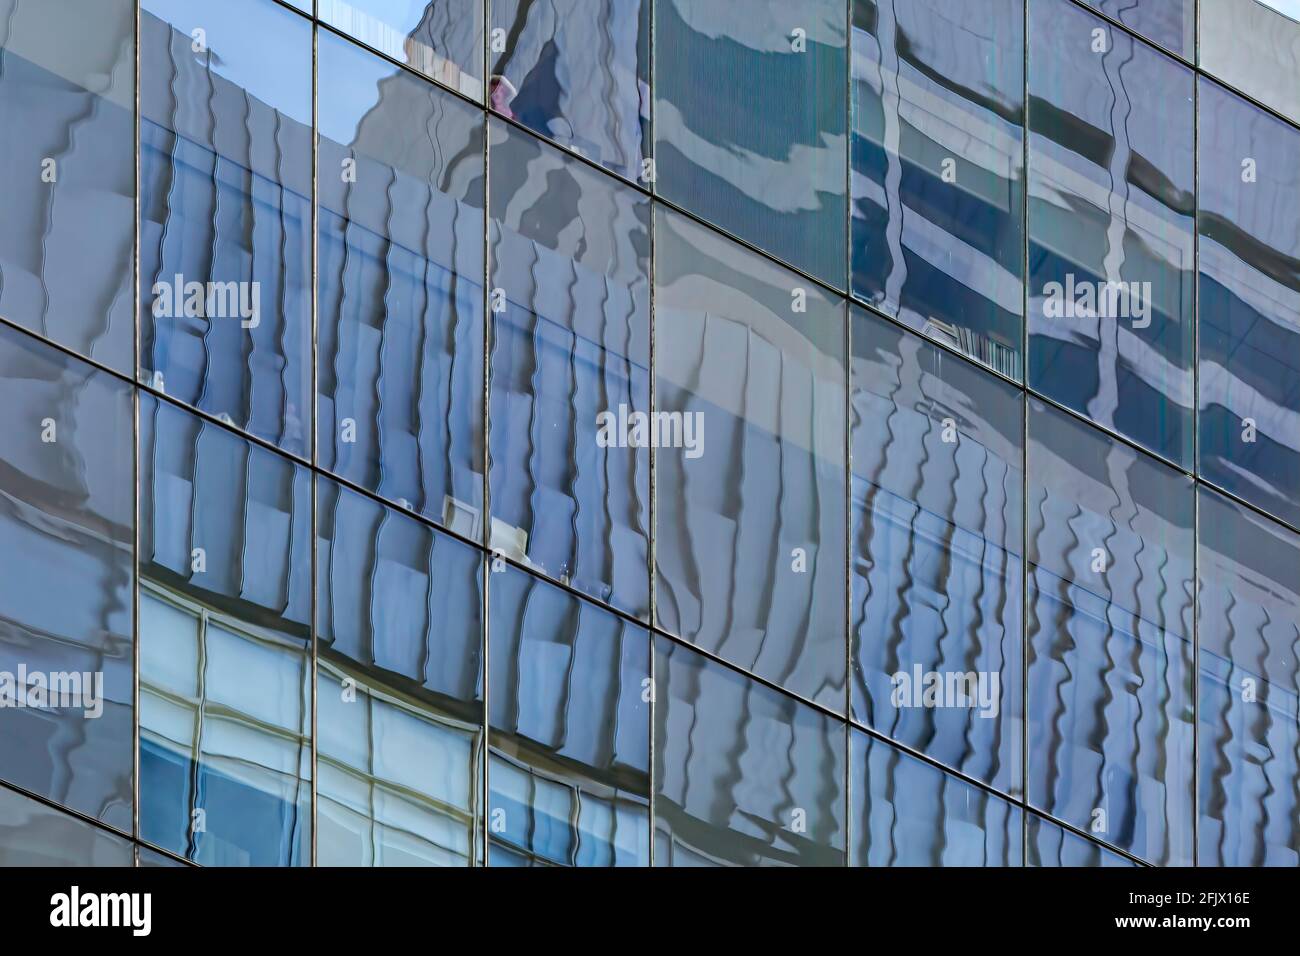 Reflective glass and steel grids in New York City office skyscrapers. Stock Photo